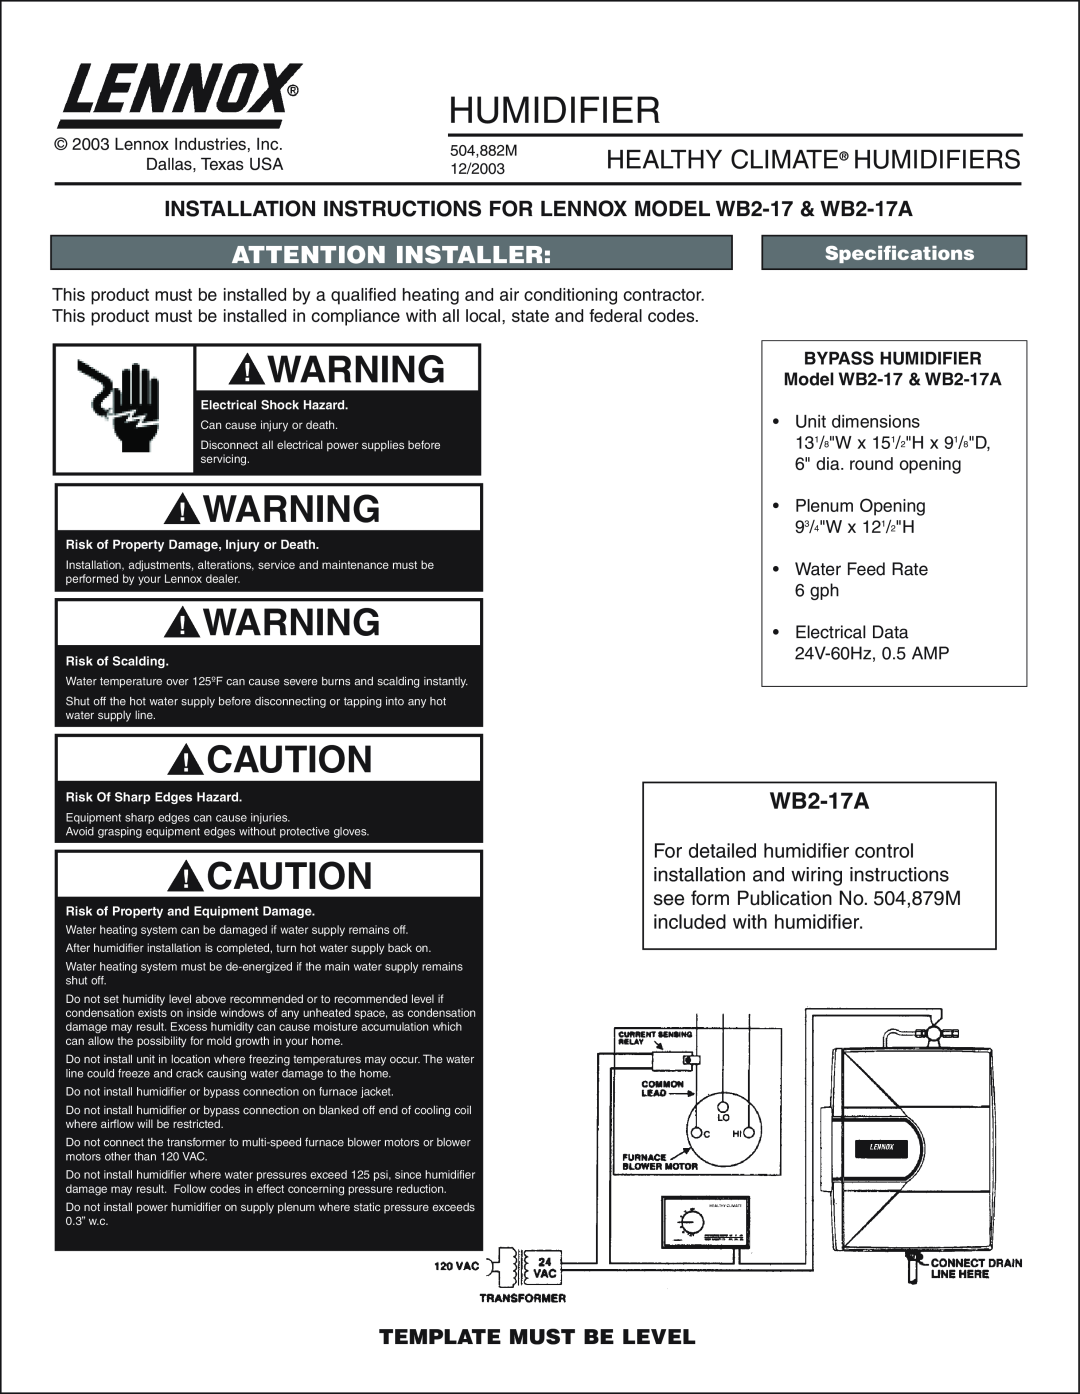 Lenox wb2-17 installation instructions WB2-17A, Healthy Climate Humidifiers, Attention Installer, Specifications 